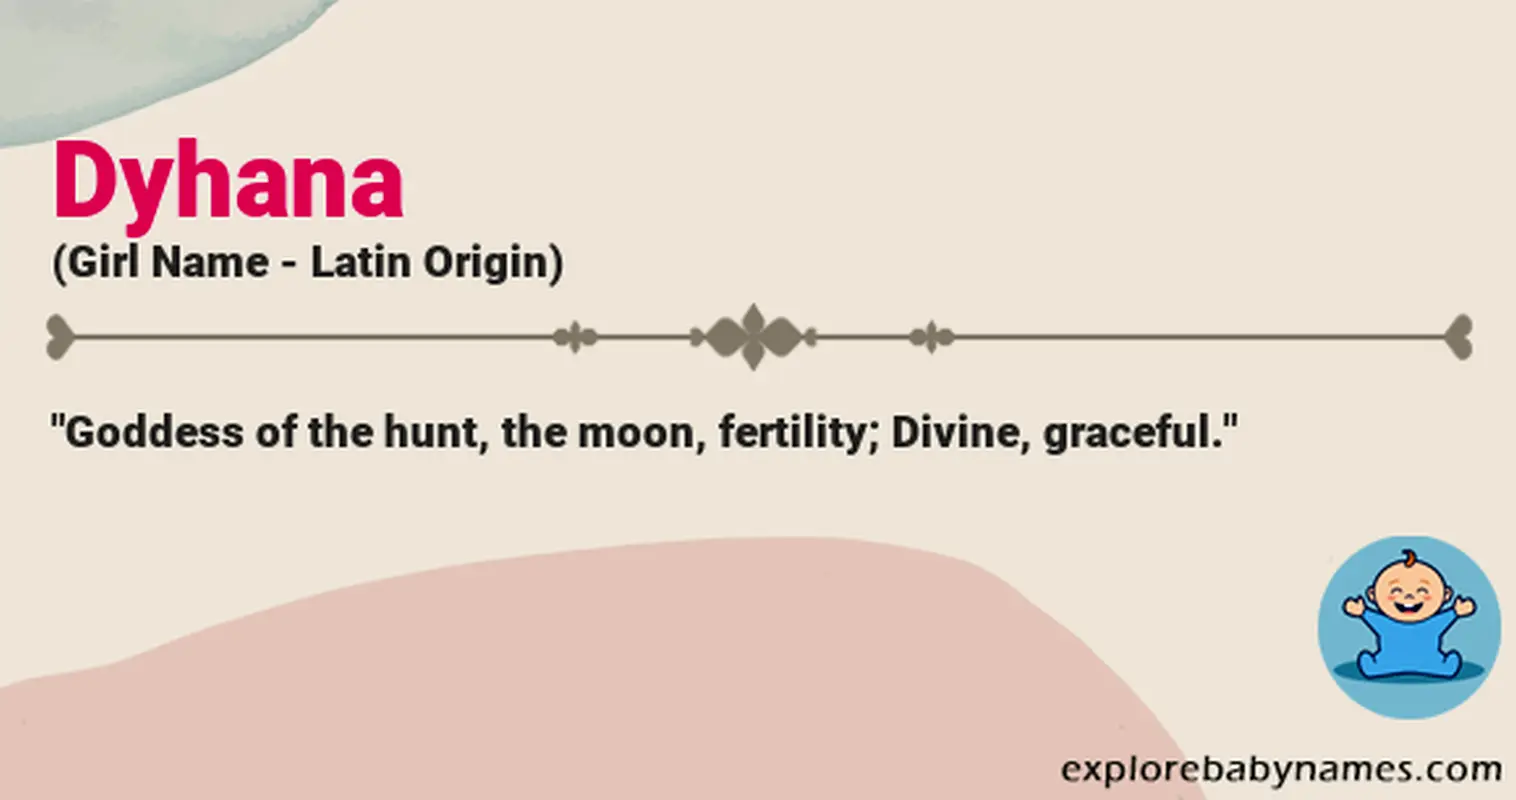 Meaning of Dyhana